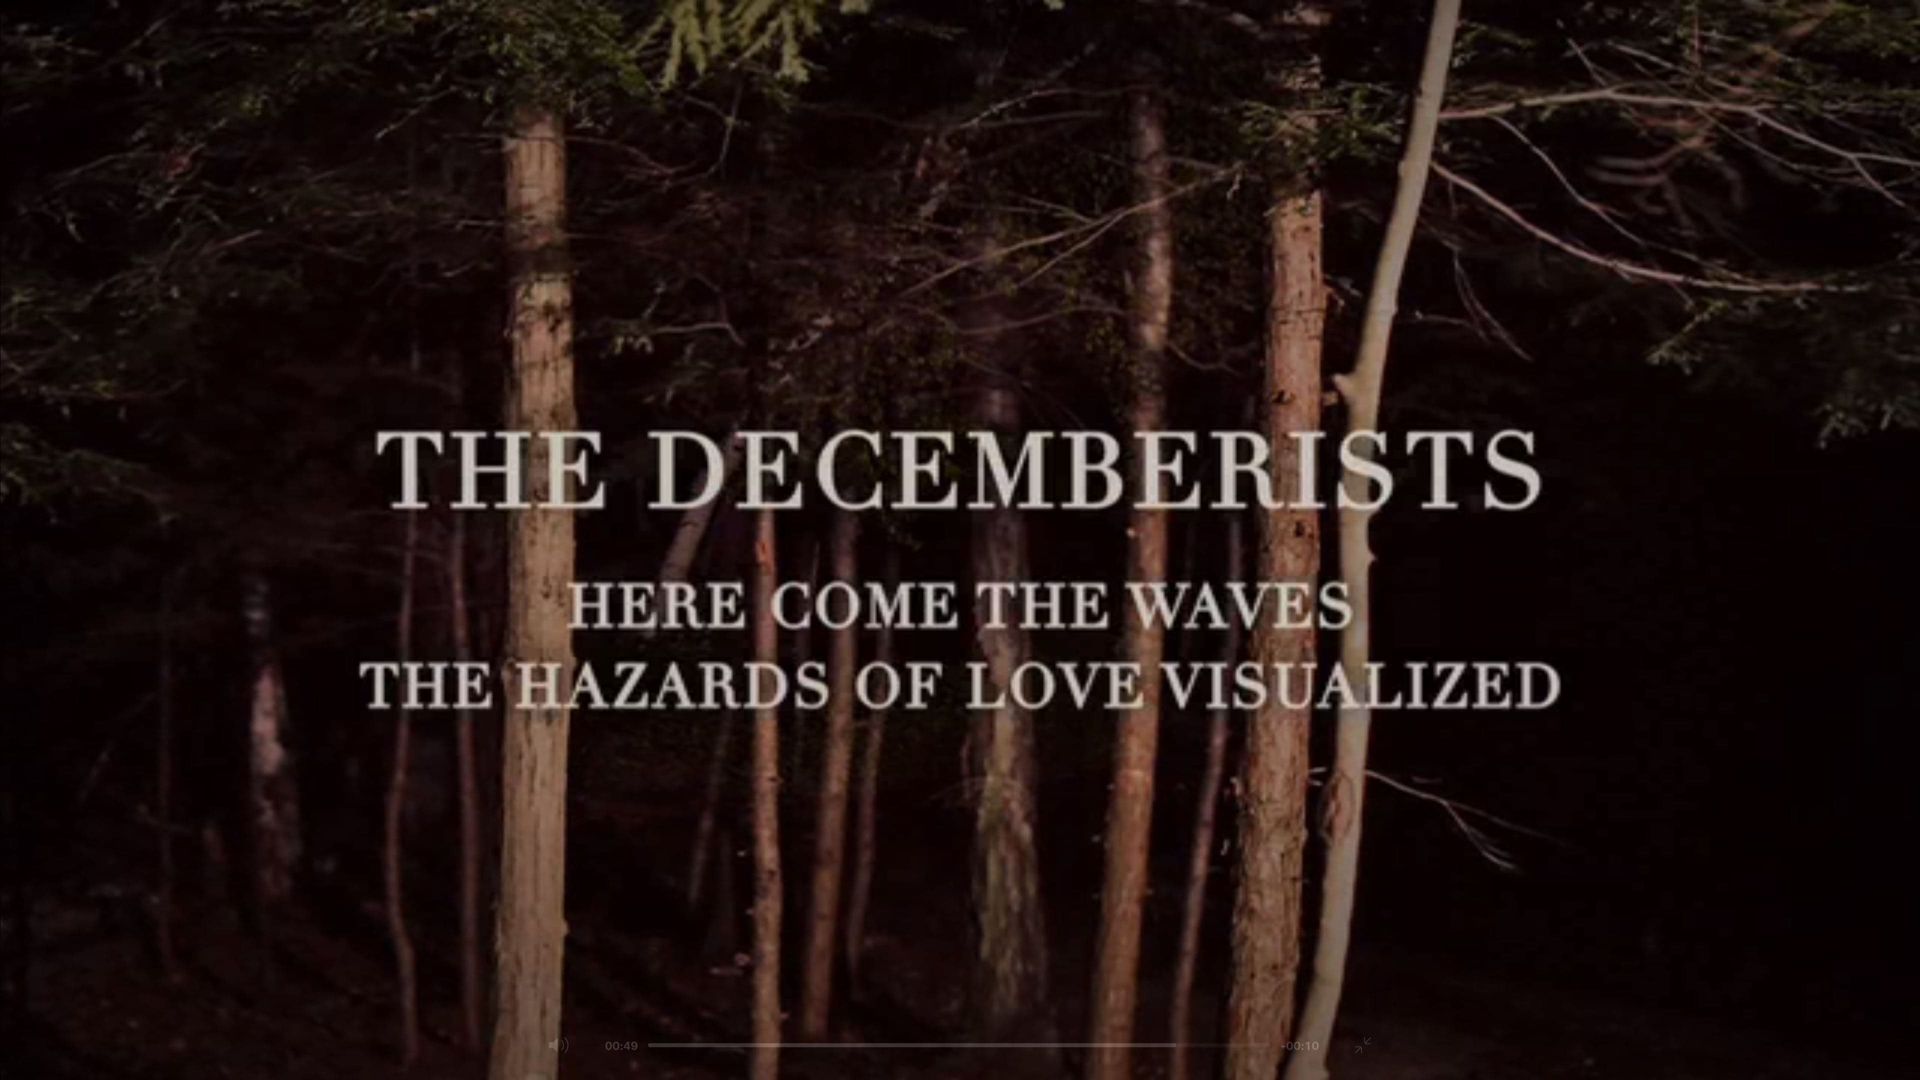 Here Come the Waves: The Hazards of Love Visualized background